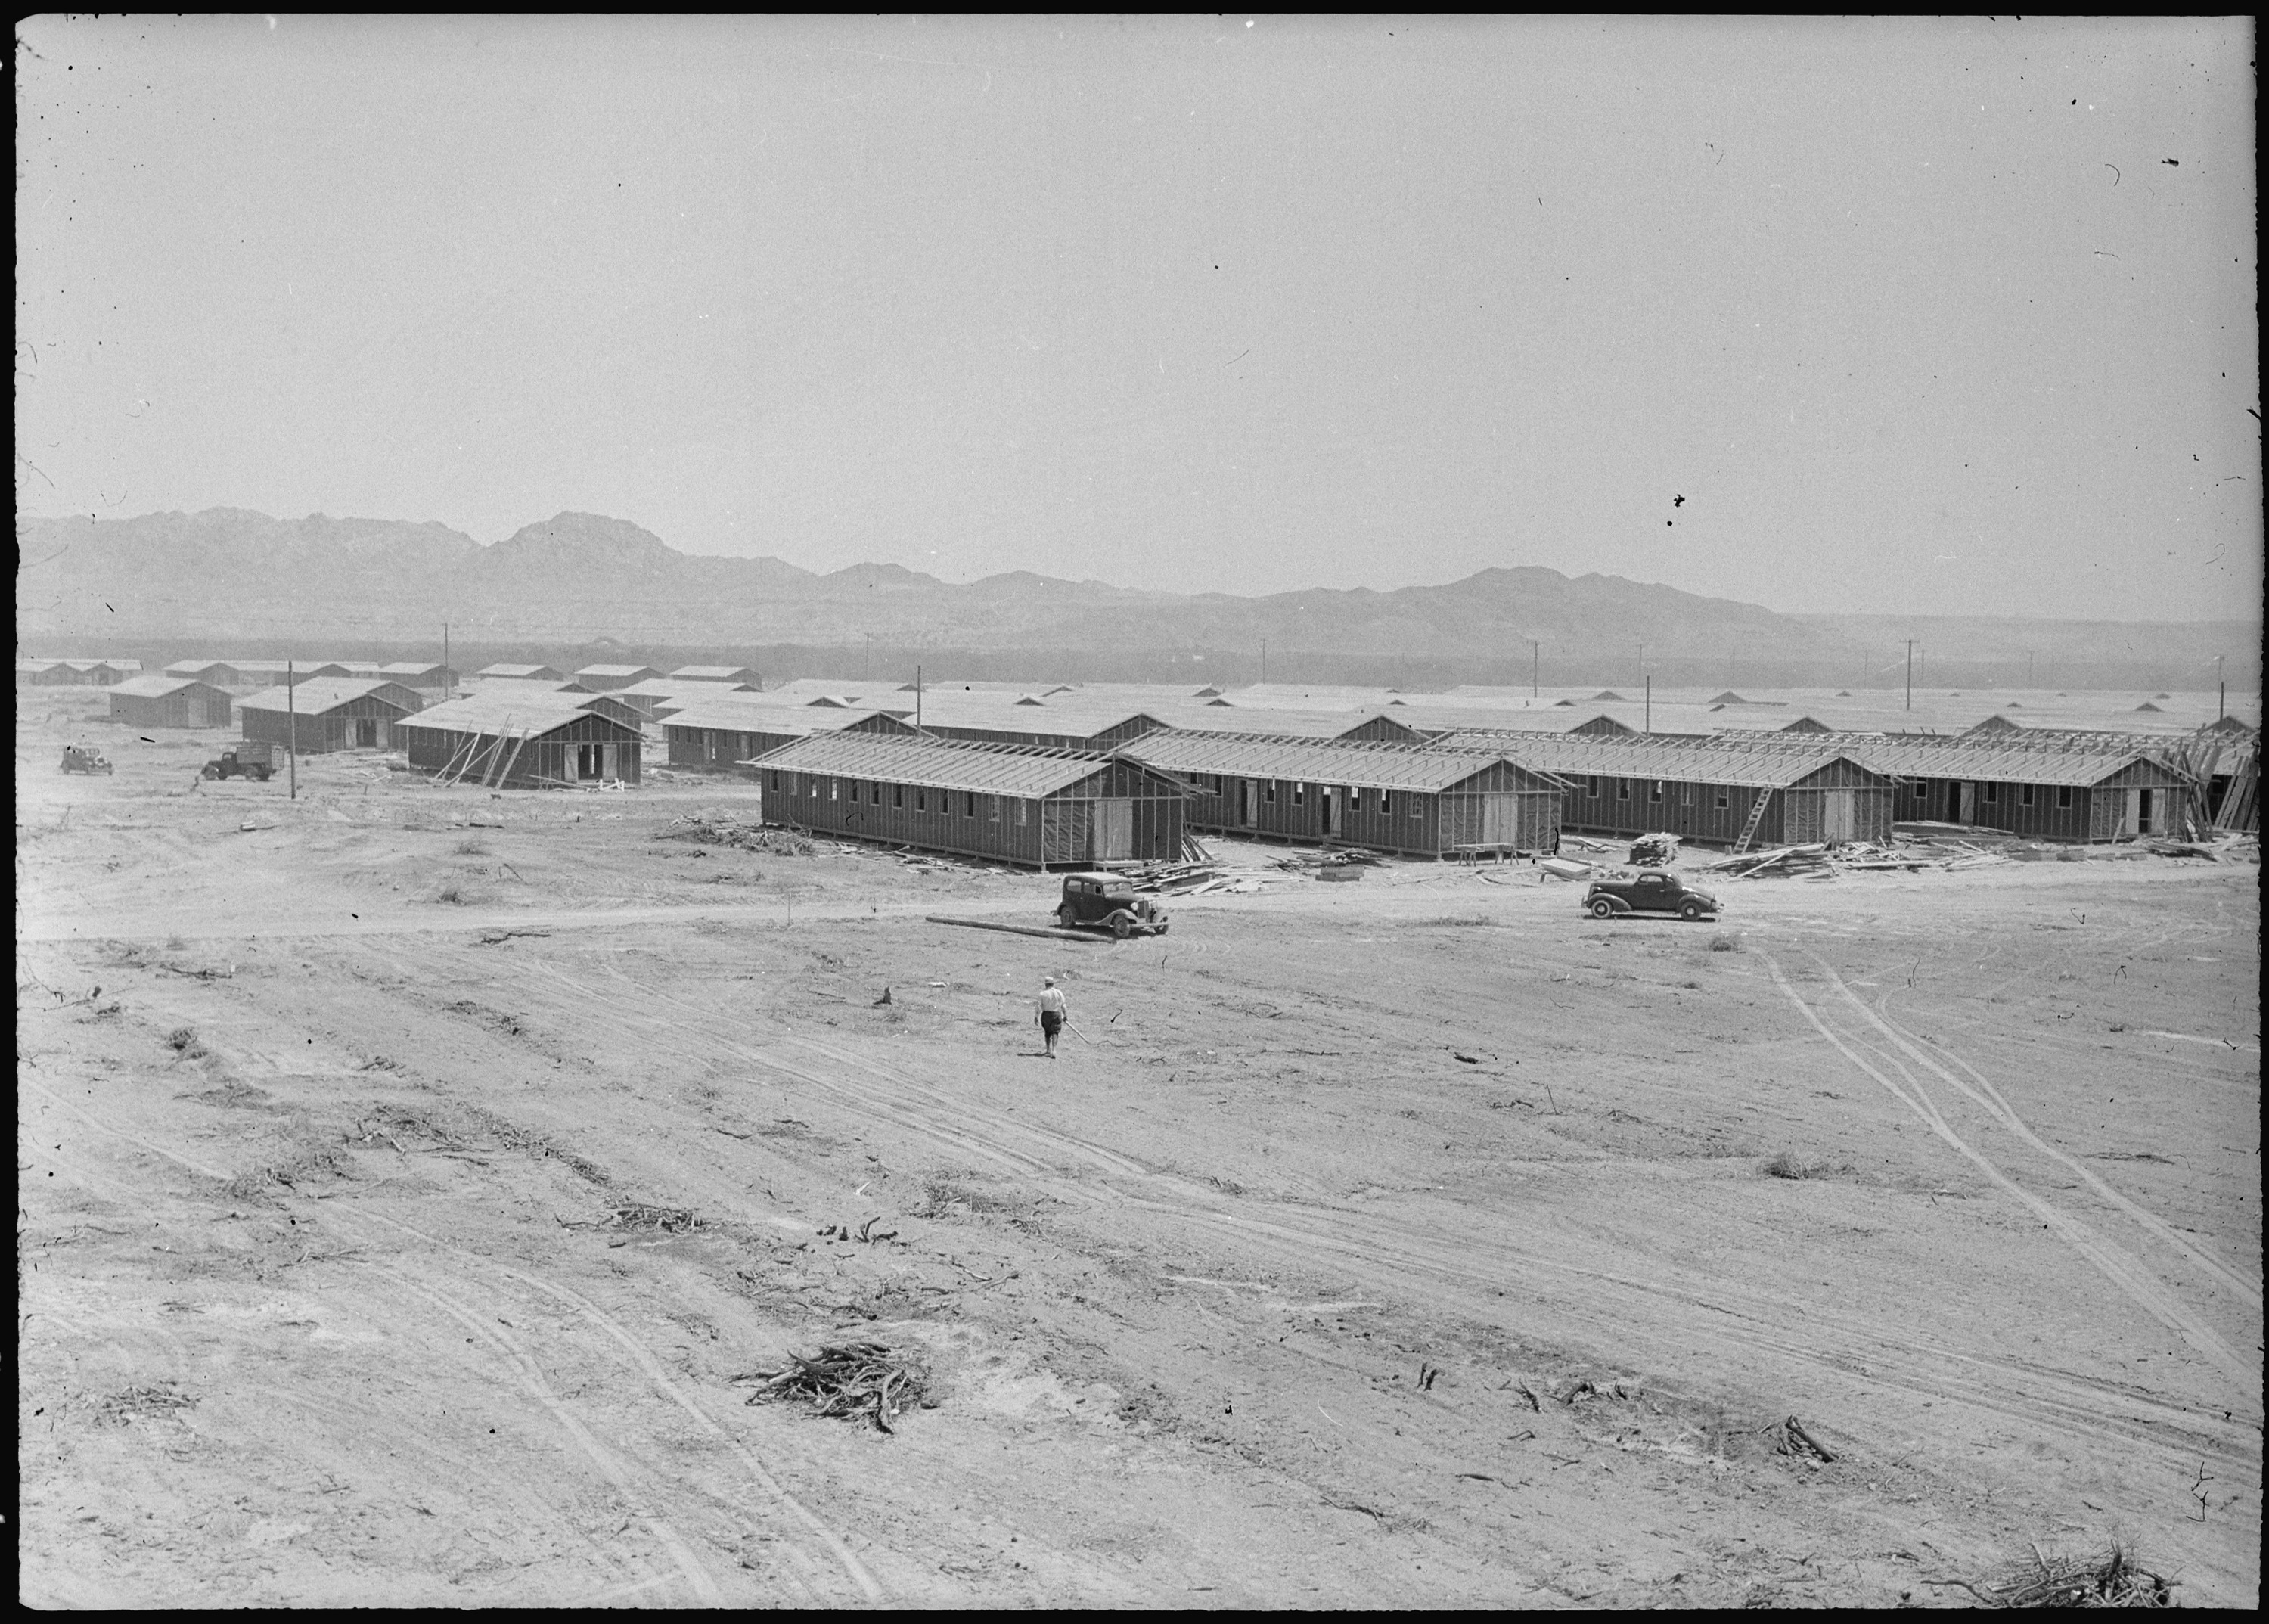  "Poston, Arizona. Site Number 1, Camp Number 1, facing Southeast." April 24, 1942. Fred Clark, War Relocation Authority Photographer, Department of the Interior. War Relocation Authority. Public Domain. 